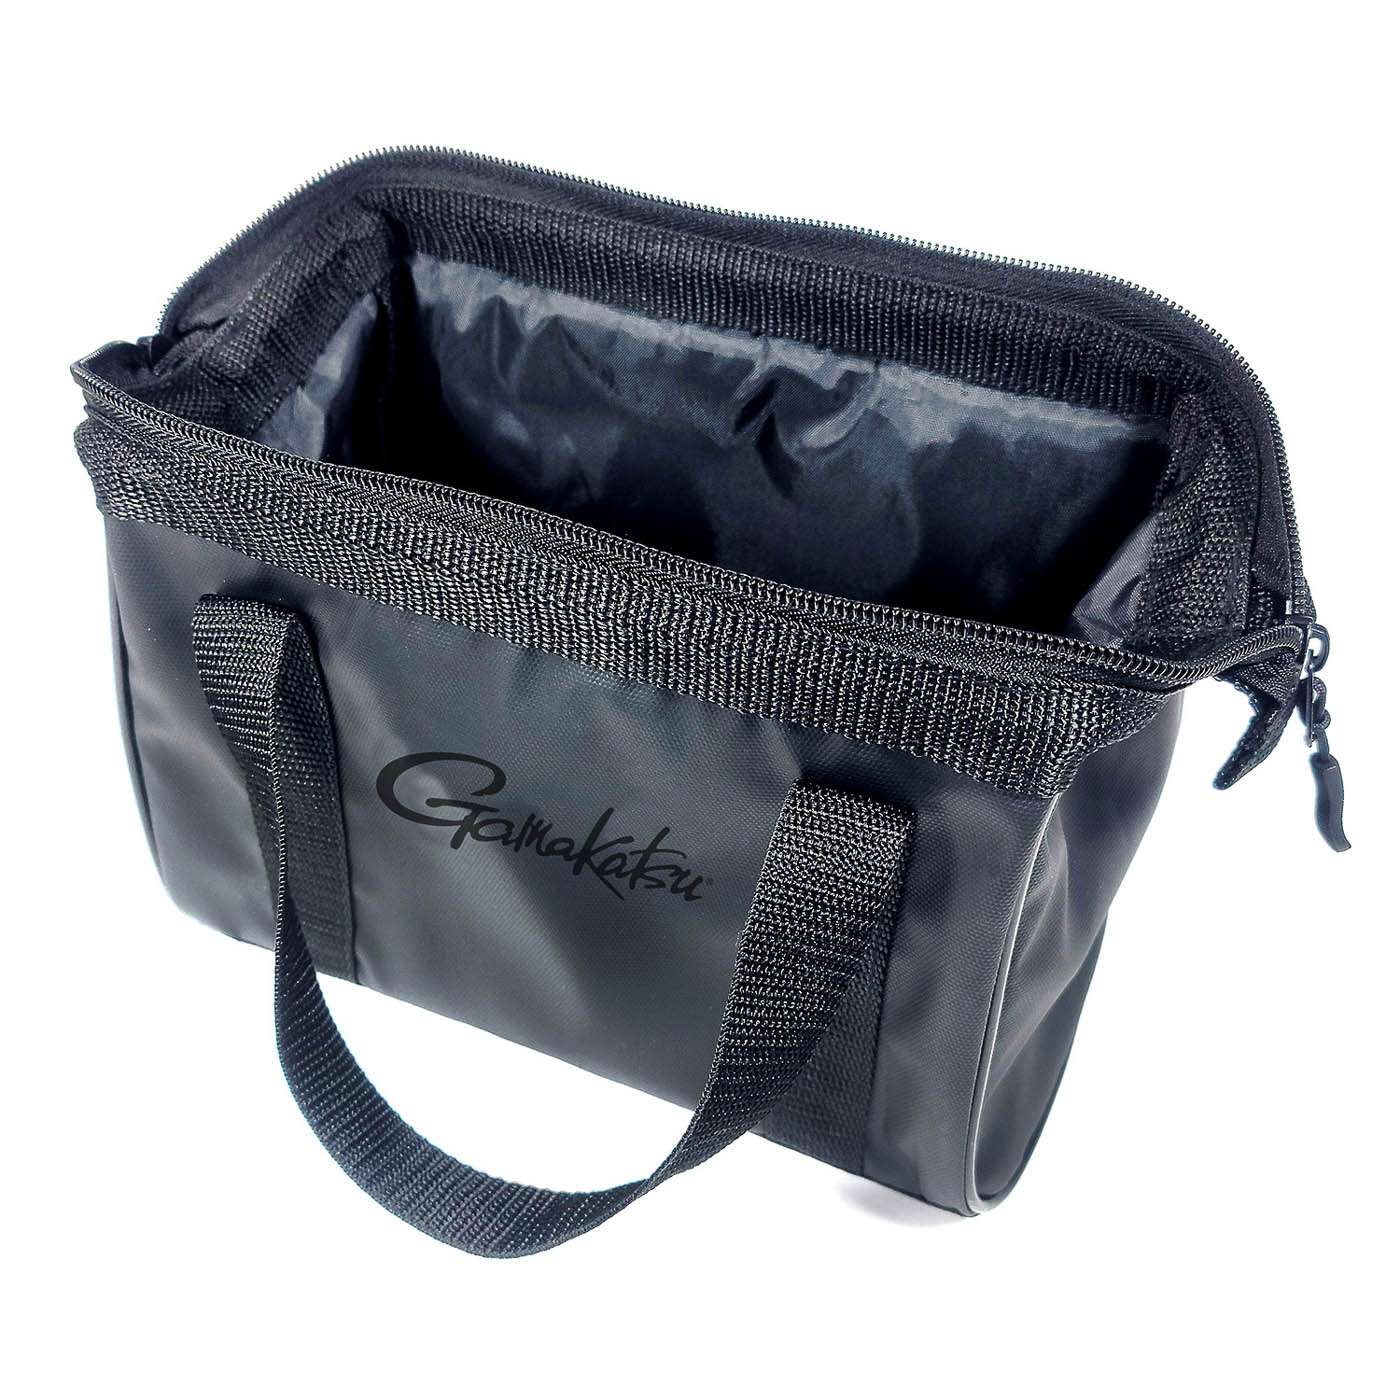 <p><span><strong>Gamakatsu G-Bag EWM 200</strong><br>The G-Bag EWM 200 Tackle Bag stows more gear using the same innovative easy-access stay-open top. The 9.5 x 5 x 7-inch size easily accommodates magnum packs of soft plastics and oversized bulk bags, so that anglers can stash their largest swimbaits or enough tubes for the season in one convenient location. Thereâs enough space to store a wide variety of tackle and gear, so anglers can keep rigging tools and other essentials handy as well. </span><span><a href=